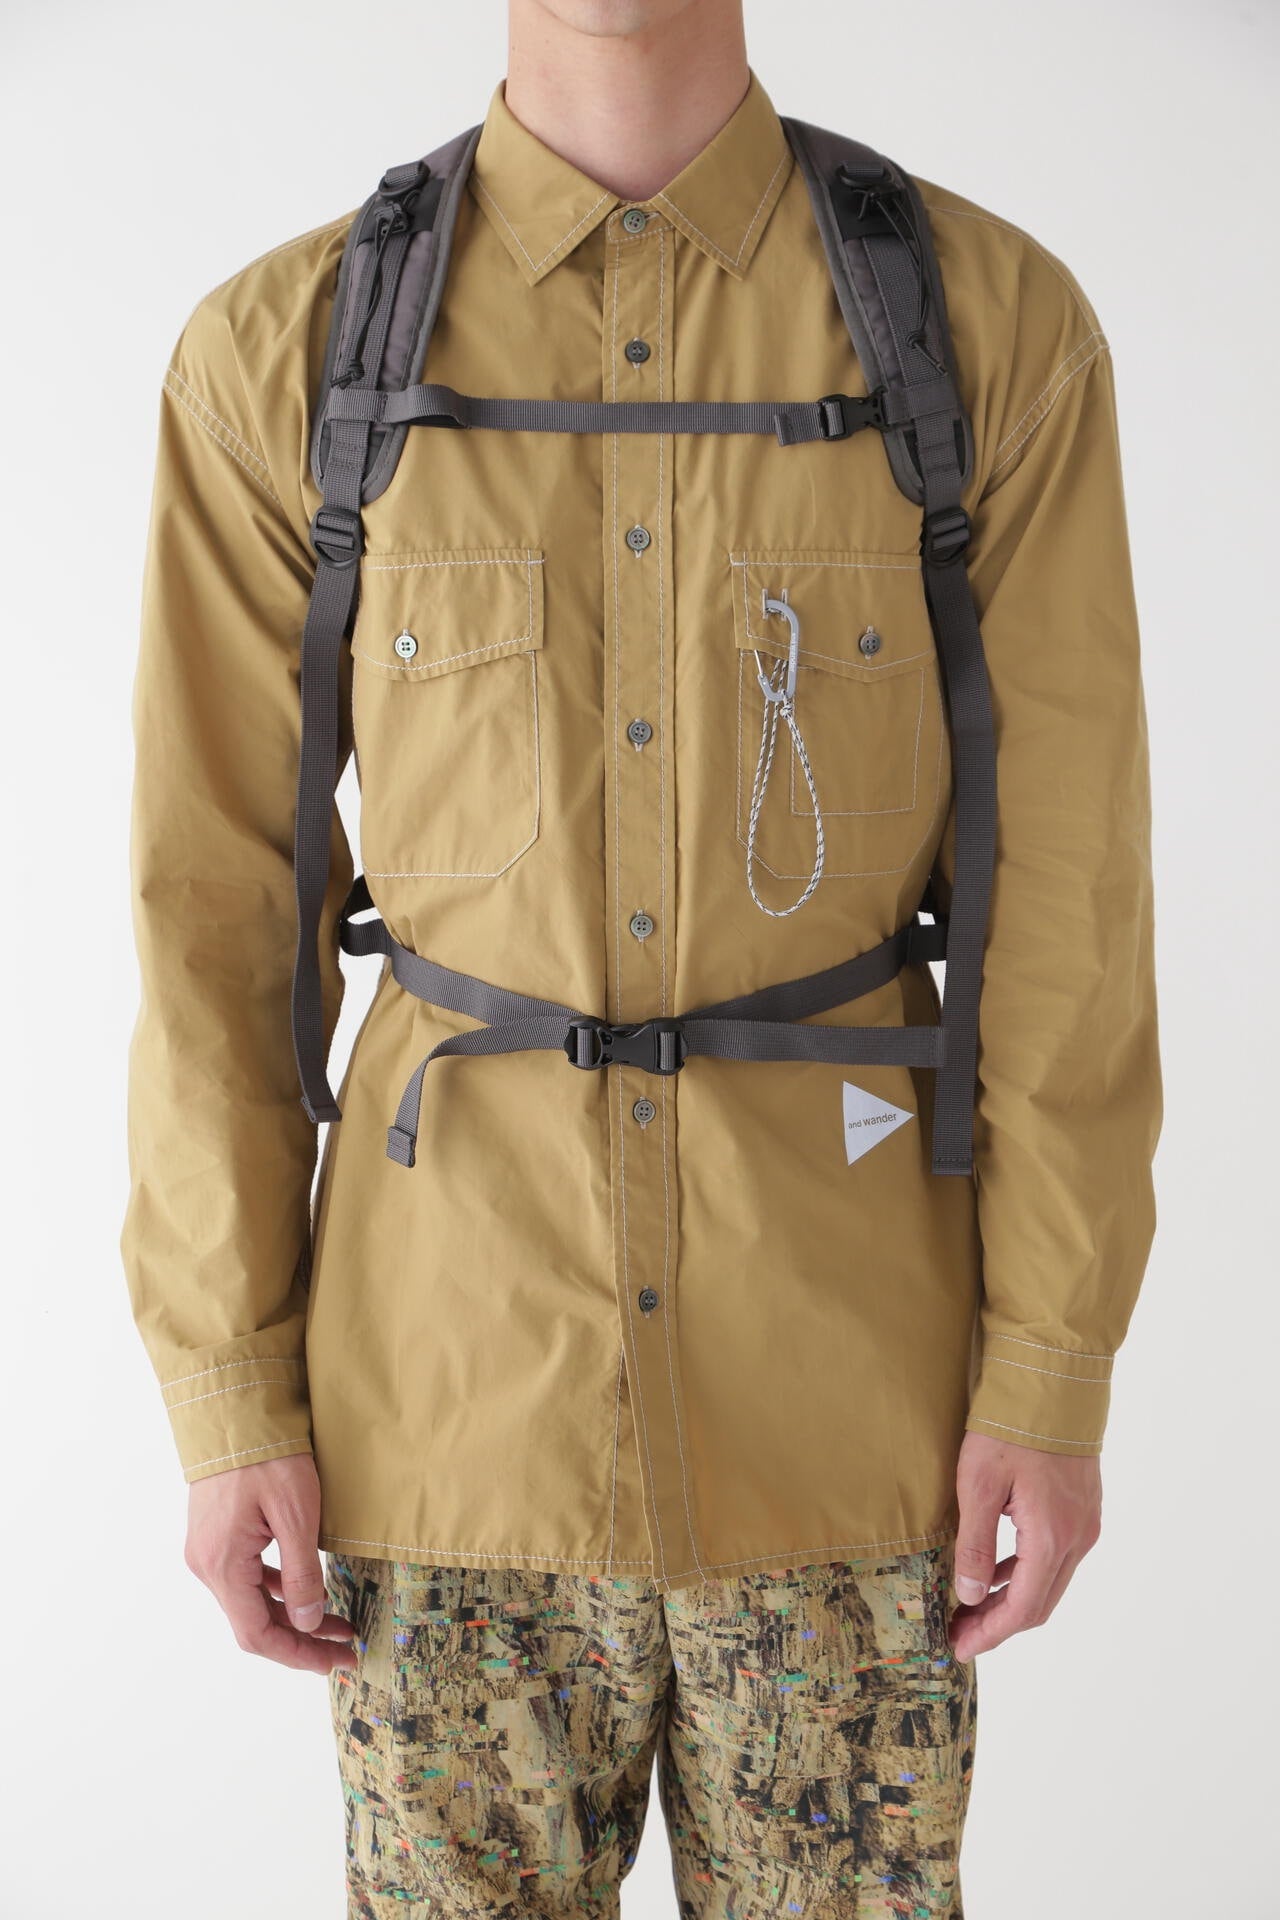 and wander PE/CO 20L daypack